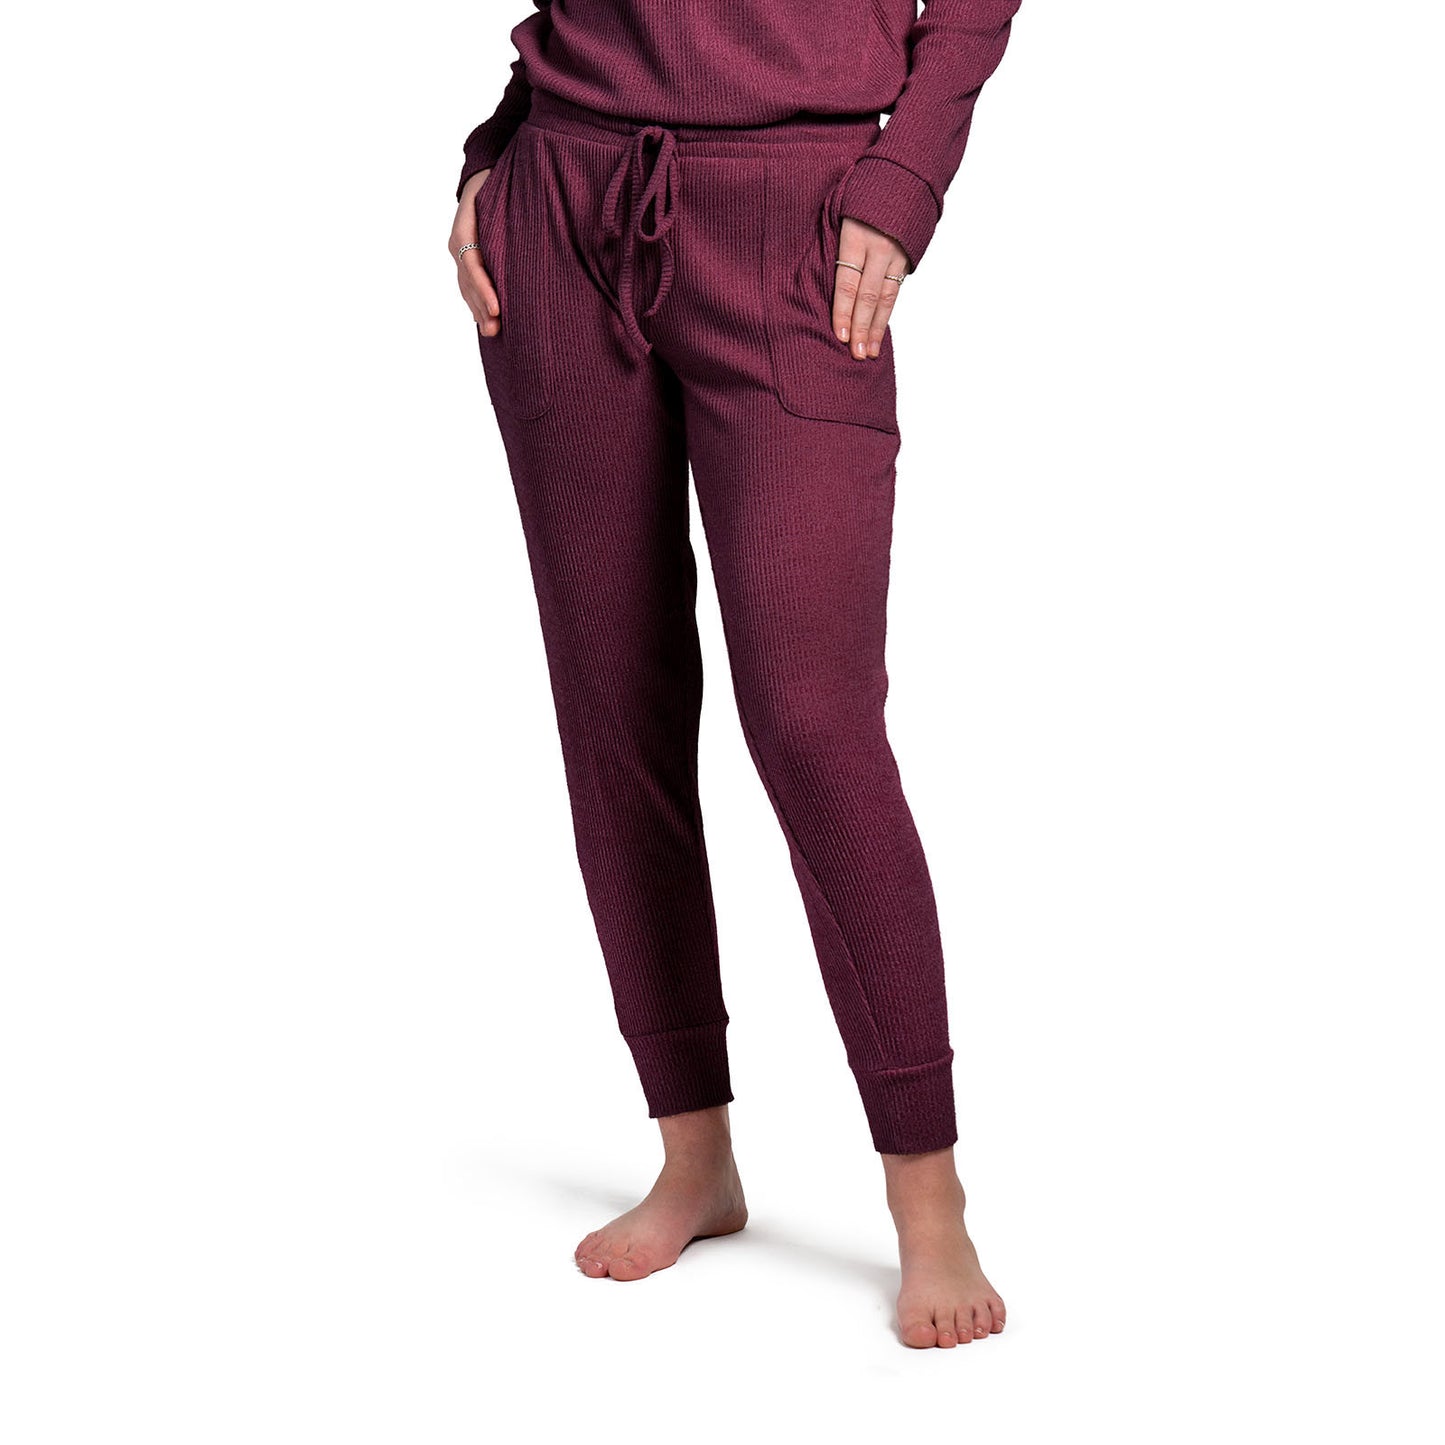 1600 × 1600px  Treat yourself to cuddle worthy softness! We curated these cozy rib knit pants for luxurious comfort with a buttery mid-weight fabric and cozy side pockets. Matching drawstring pouch packaging makes this item a great gift! Color wine.